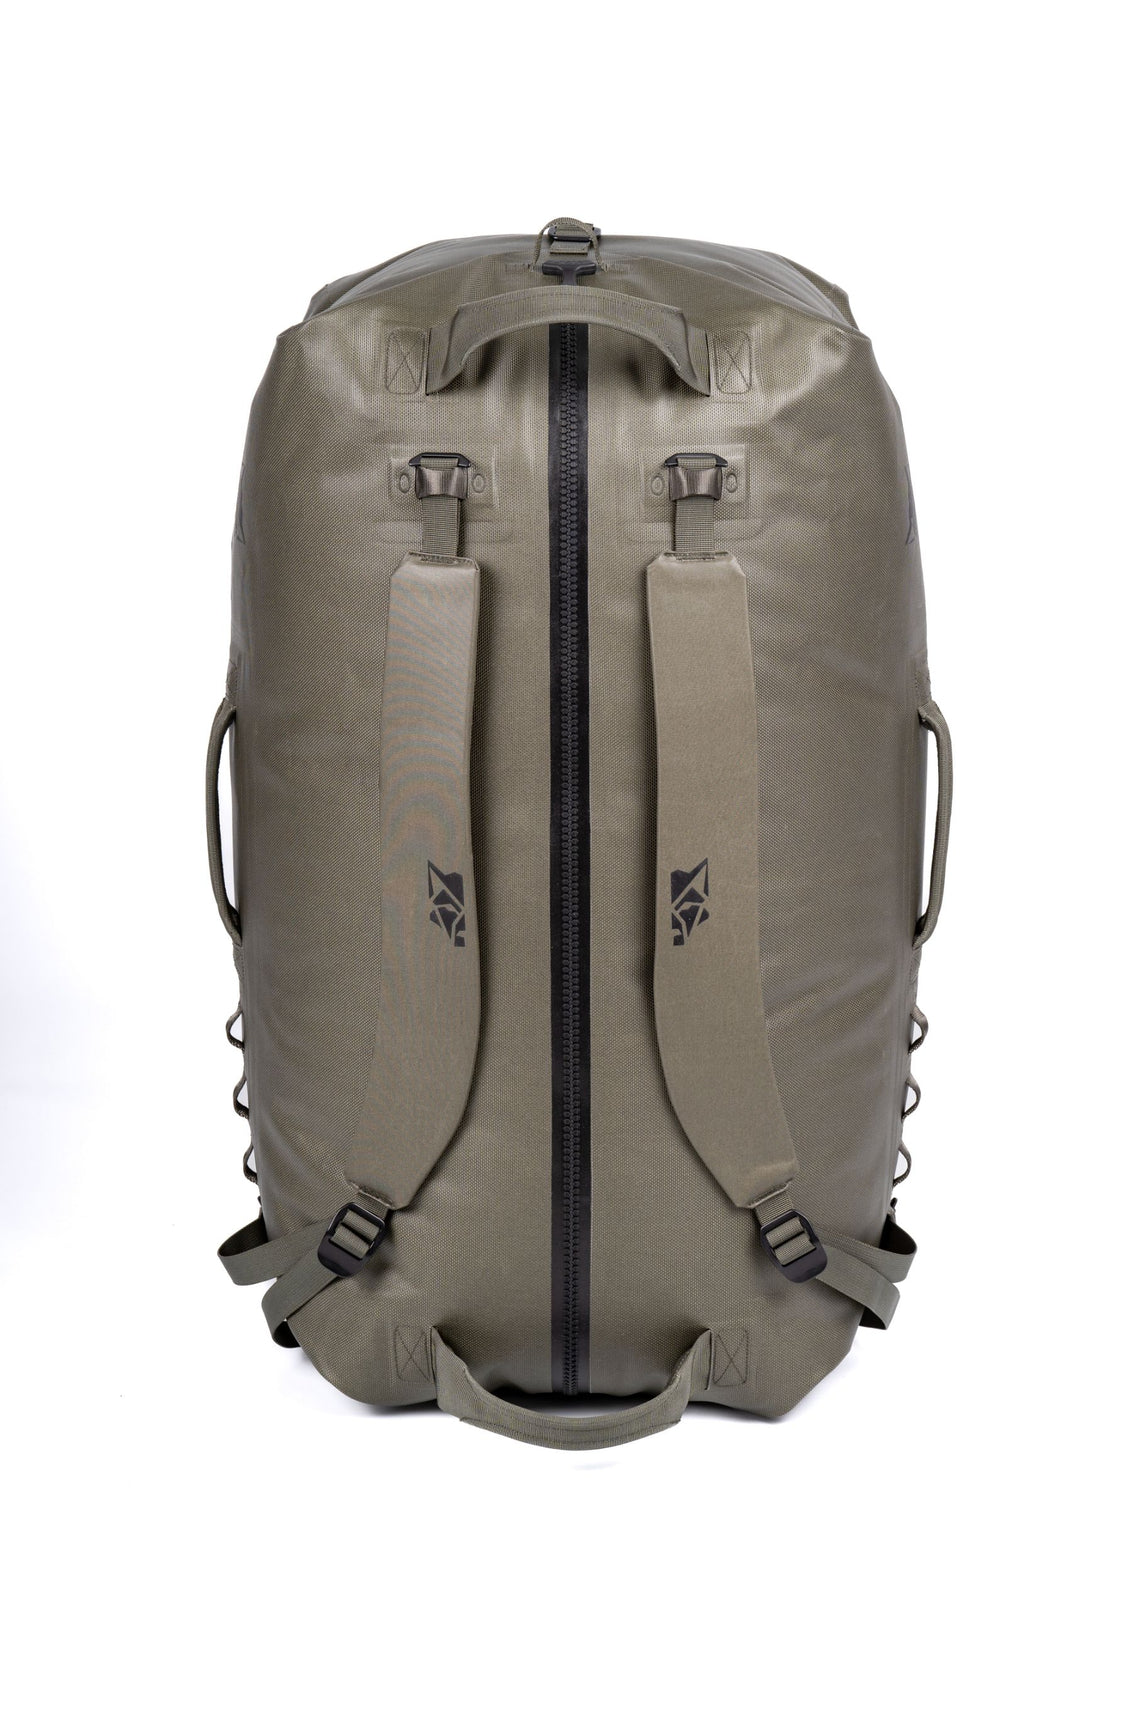 The Expedition Duffel 110L